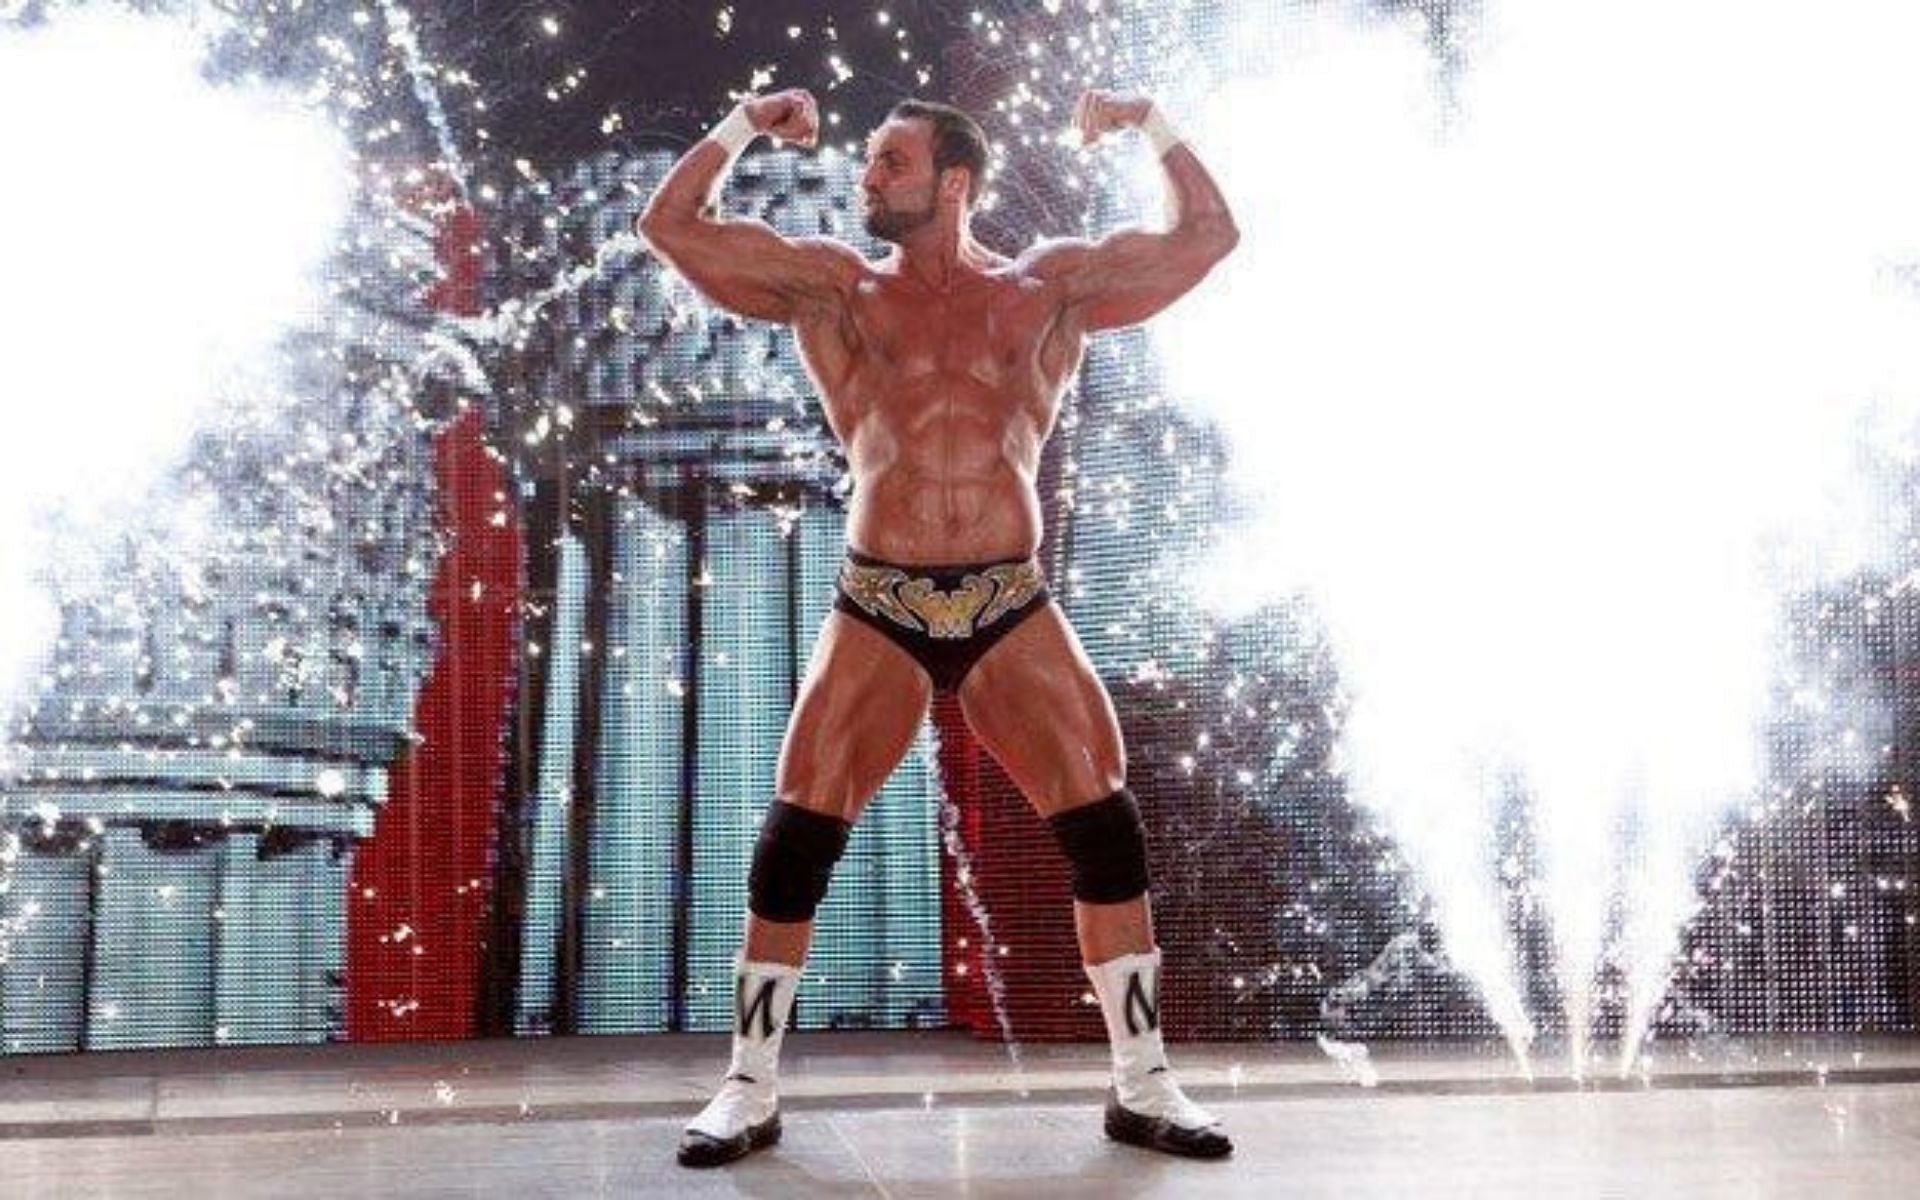 Chris Masters during his entrance on RAW